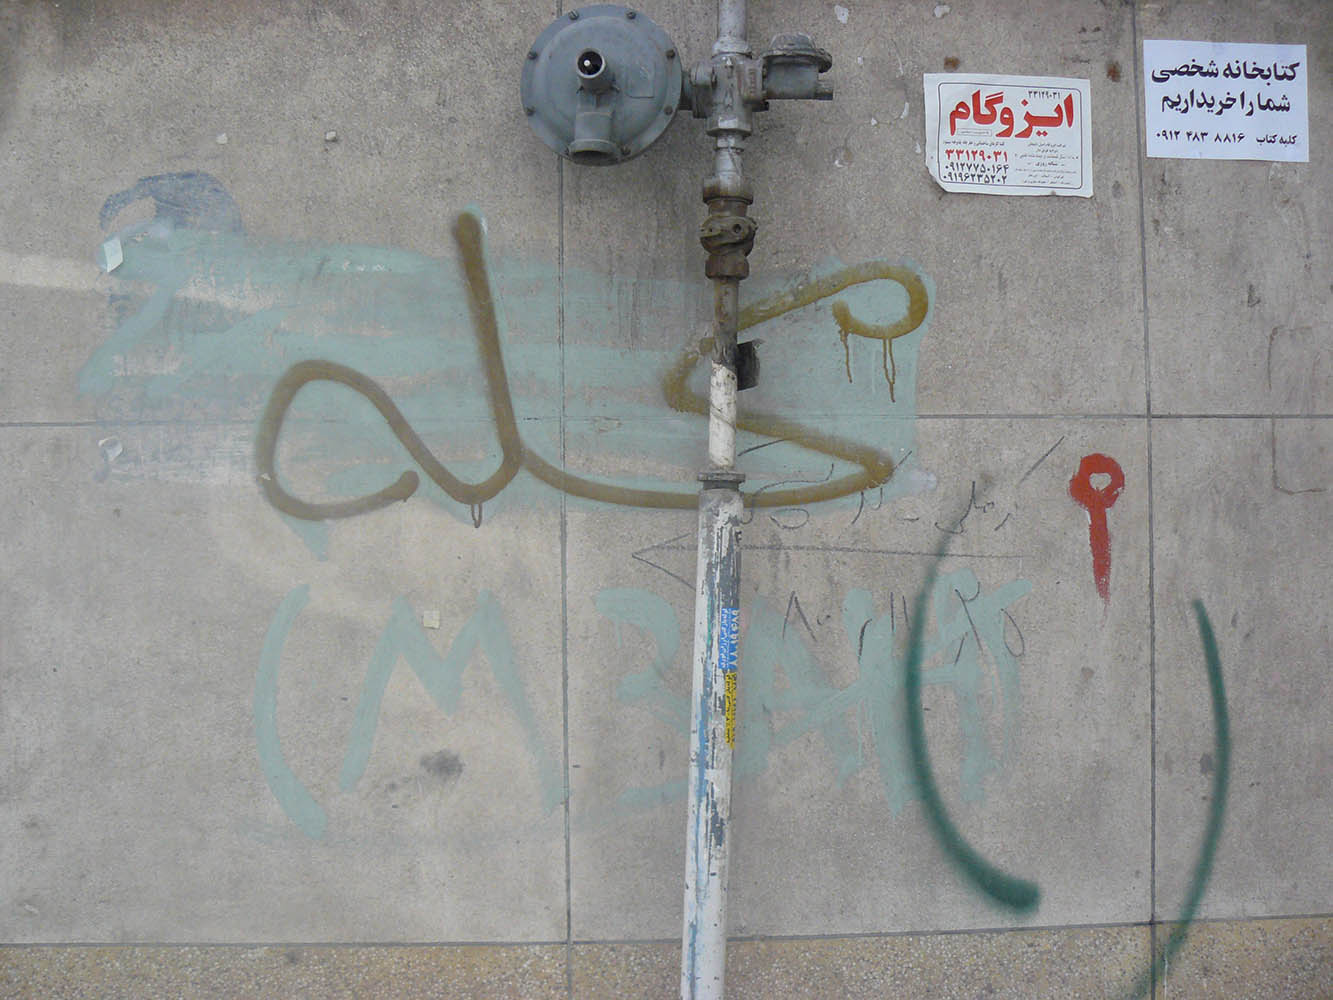 Photographing Urban Graffiti and Vandalism in Iran Since 2011-On Going